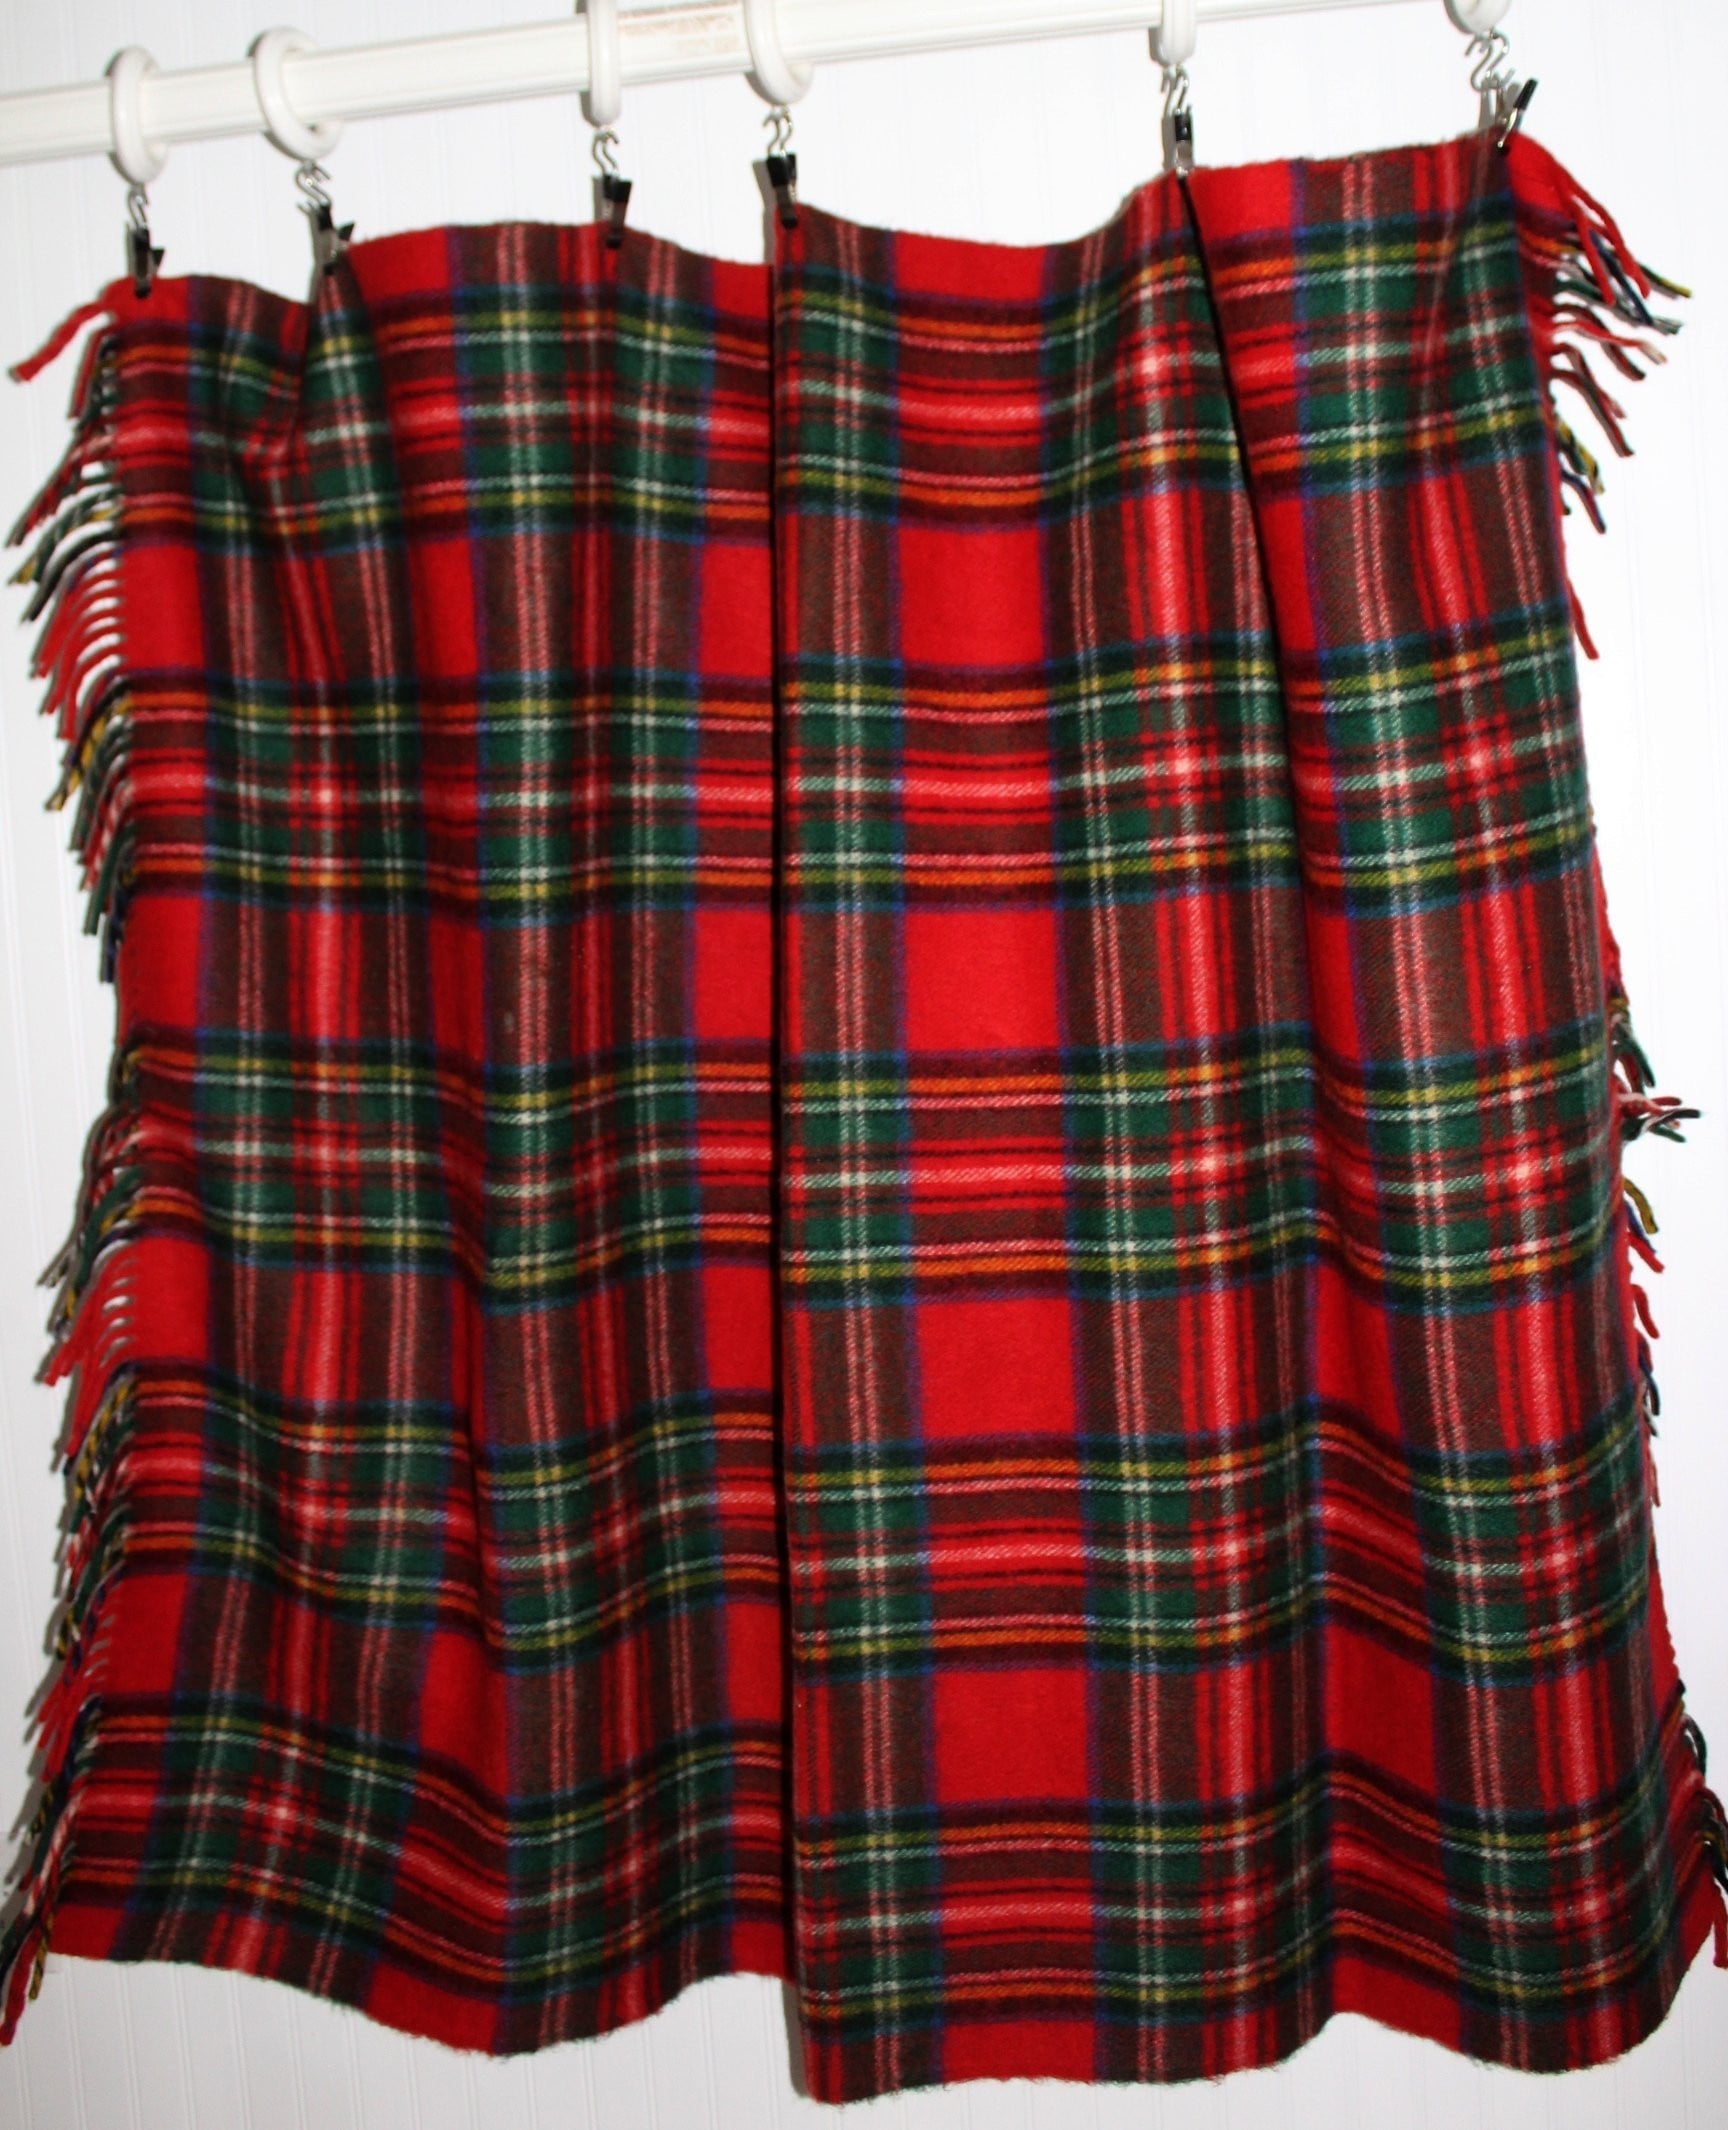 Horner Wool Fringed Throw 51" X 63" Red Tartan Plaid Heavy Soft Nap Excellent 1950s rare condition